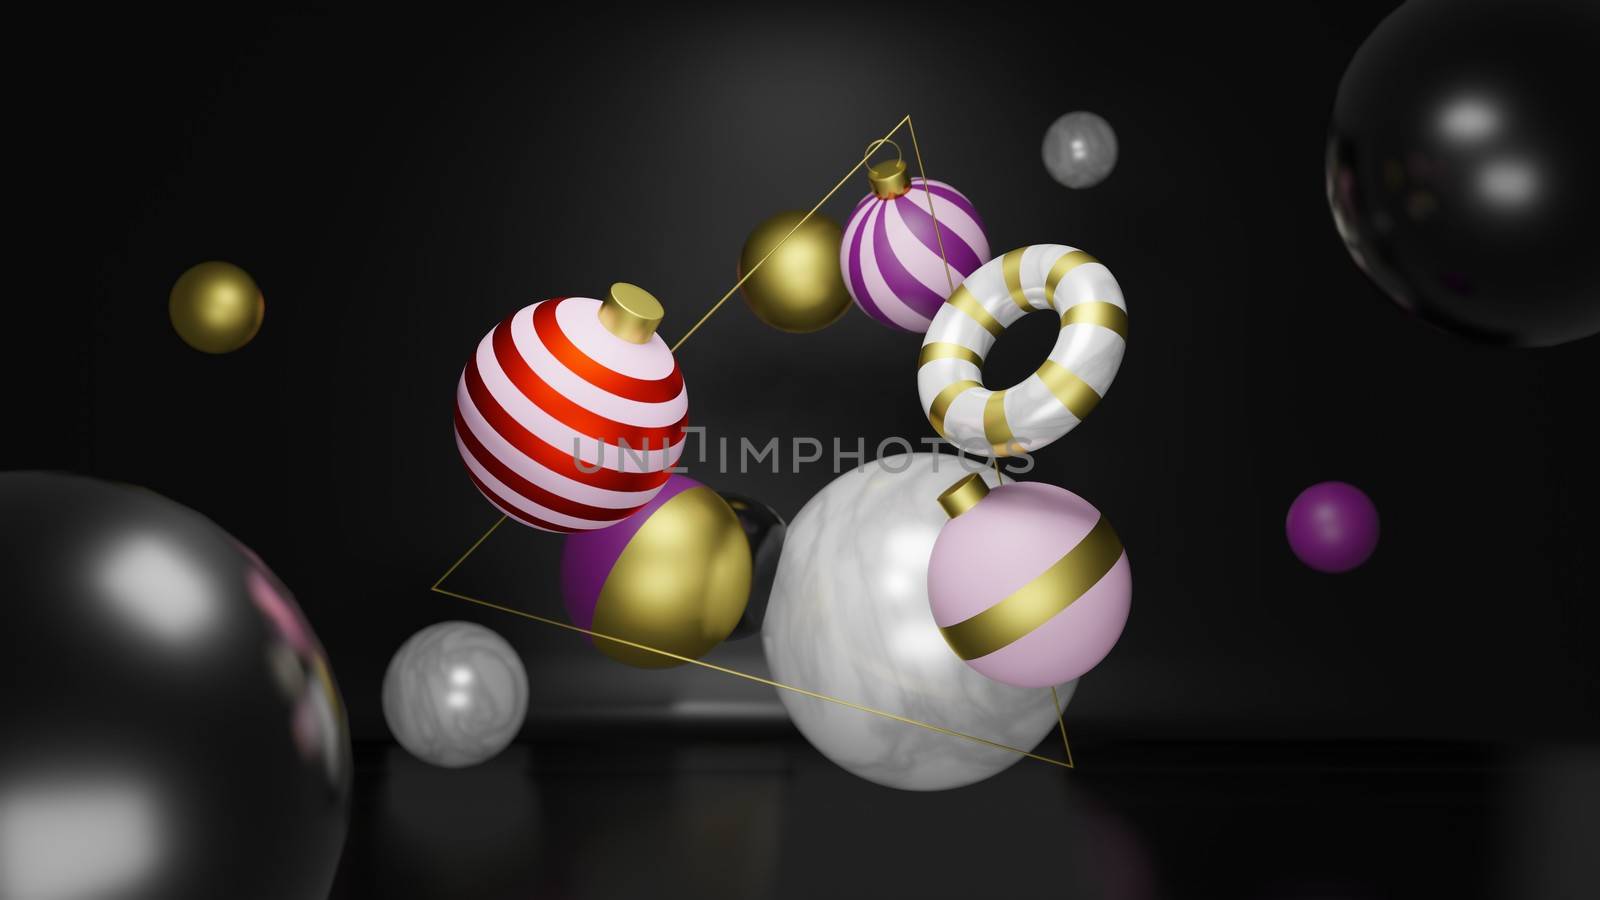 Christmas ornaments floating in space area for xmas/ christmas holiday season time. Floating x-mas bauble with ornament in 3D illustration or 3D rendering